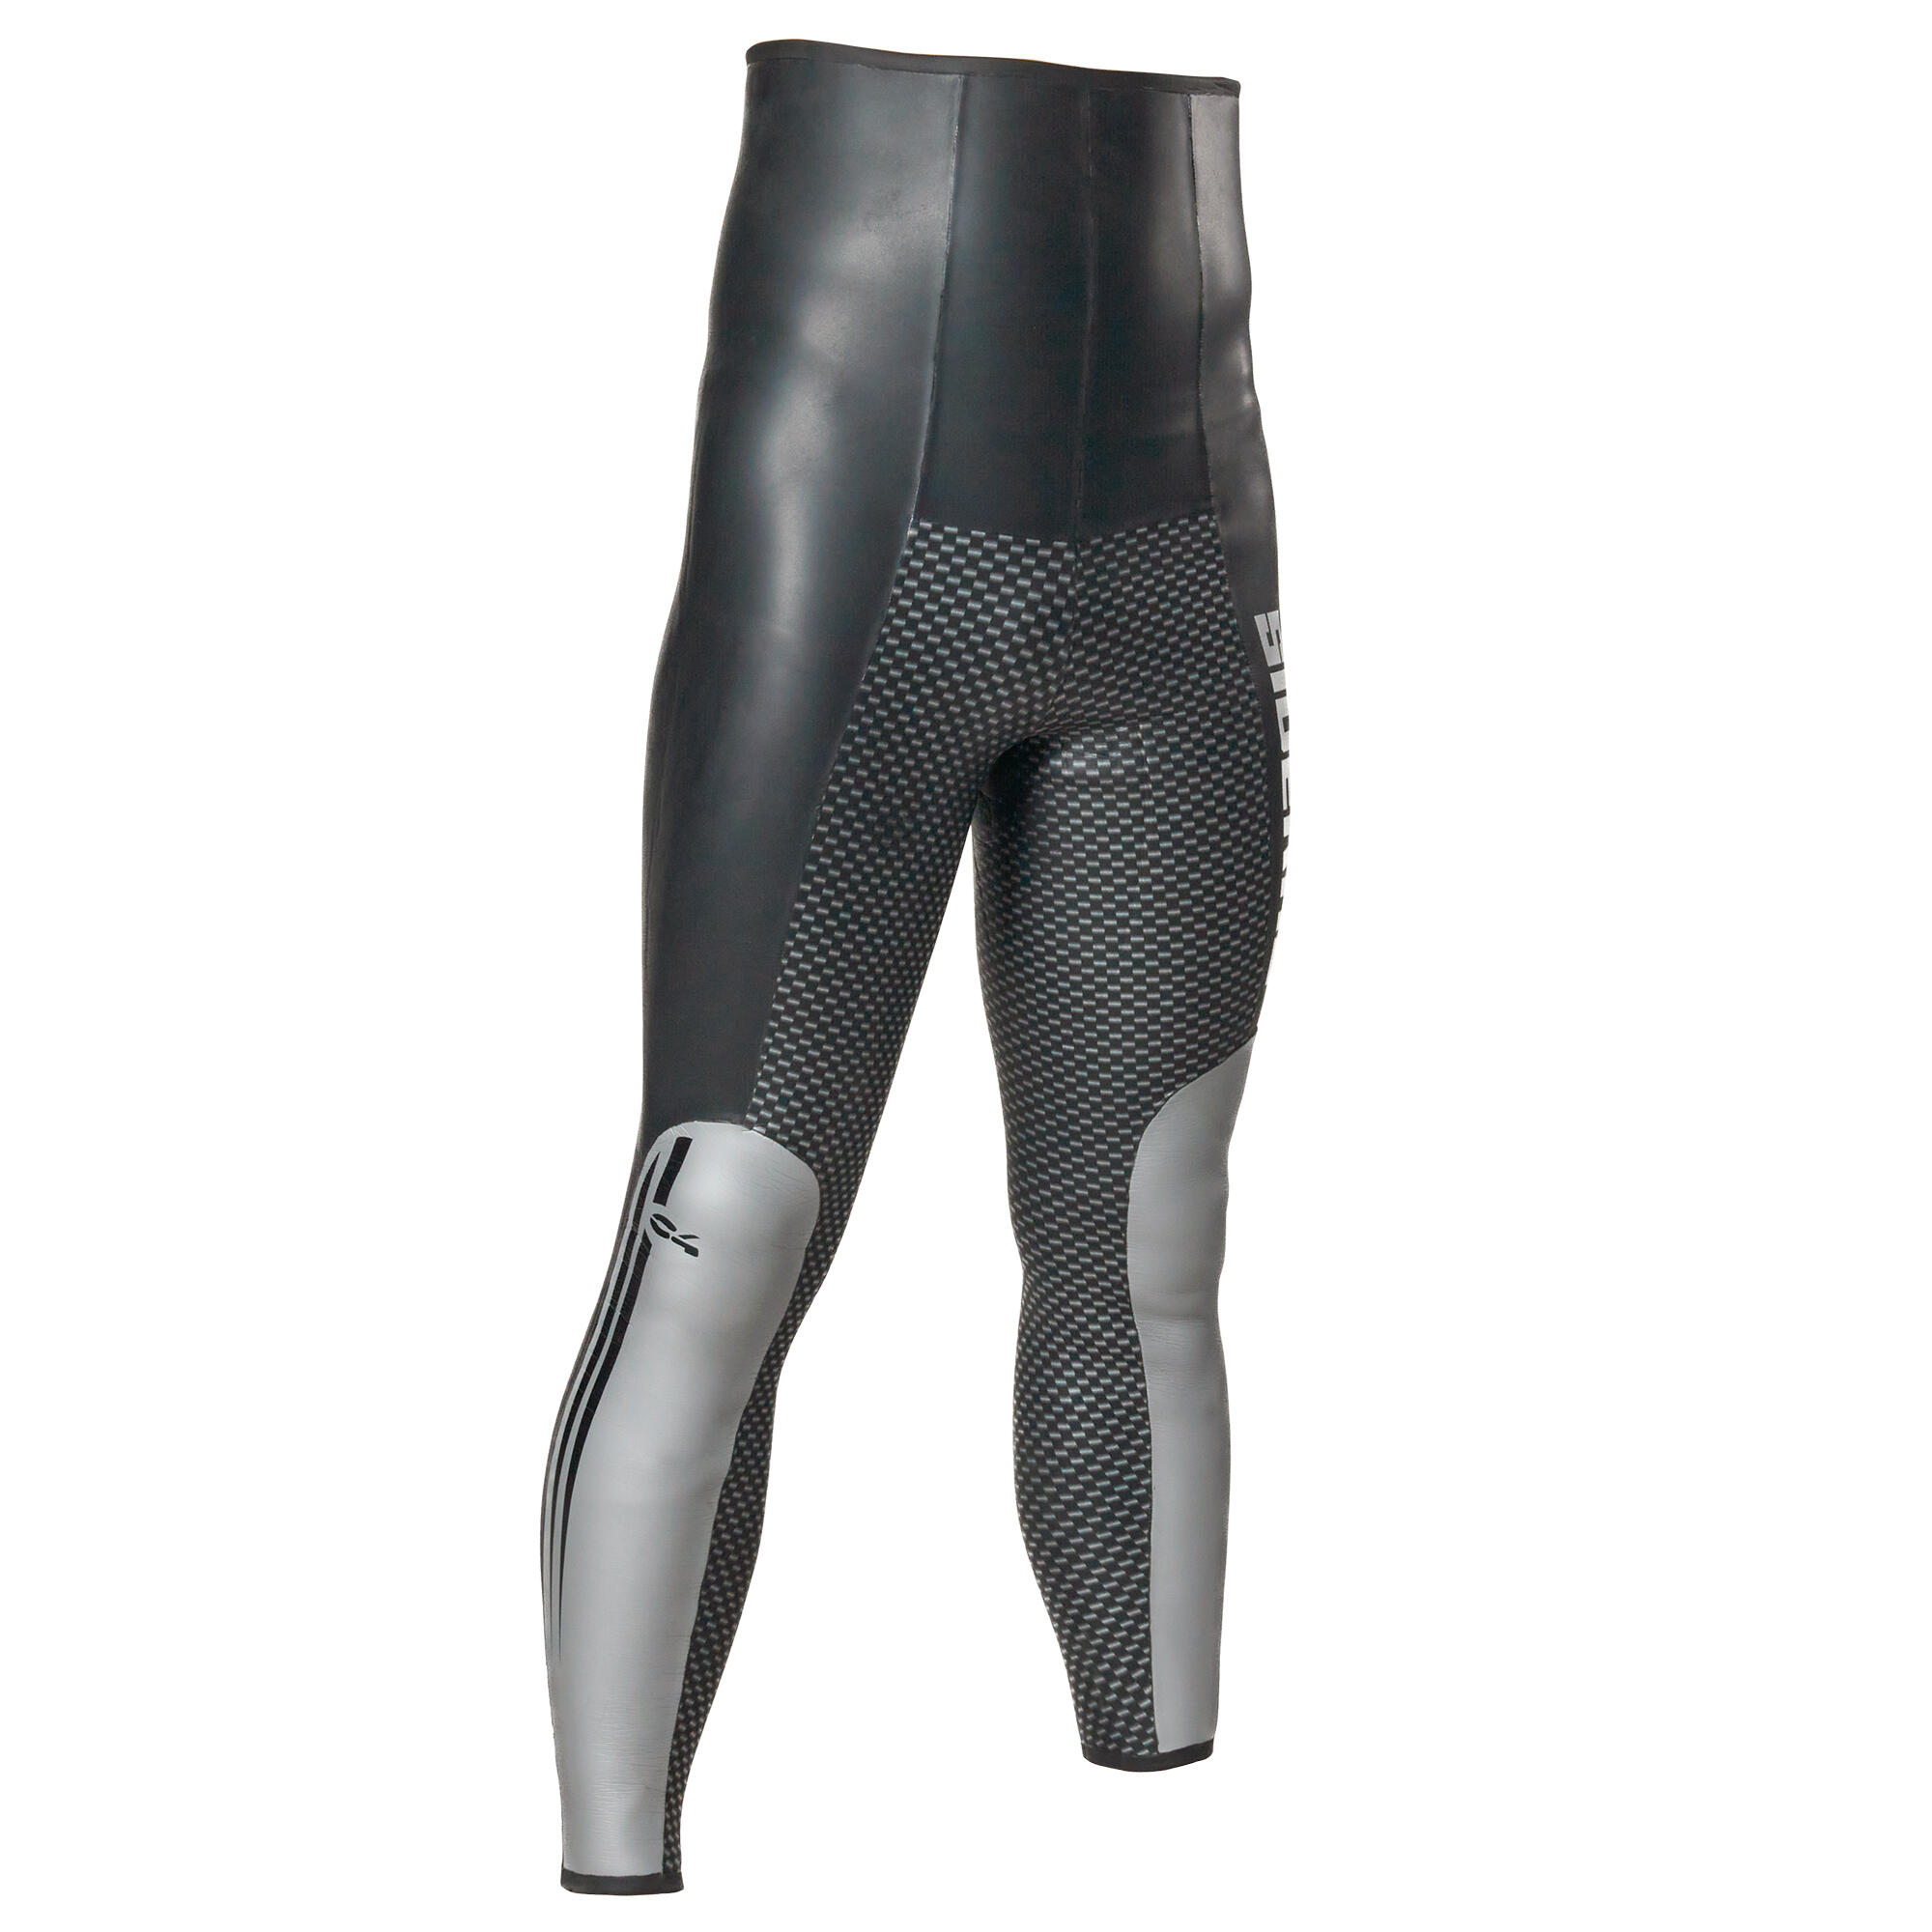 C4 CARBON MEN'S TROUSERS SIDERAL 3MM C4 CARBON FOR FREEDIVING